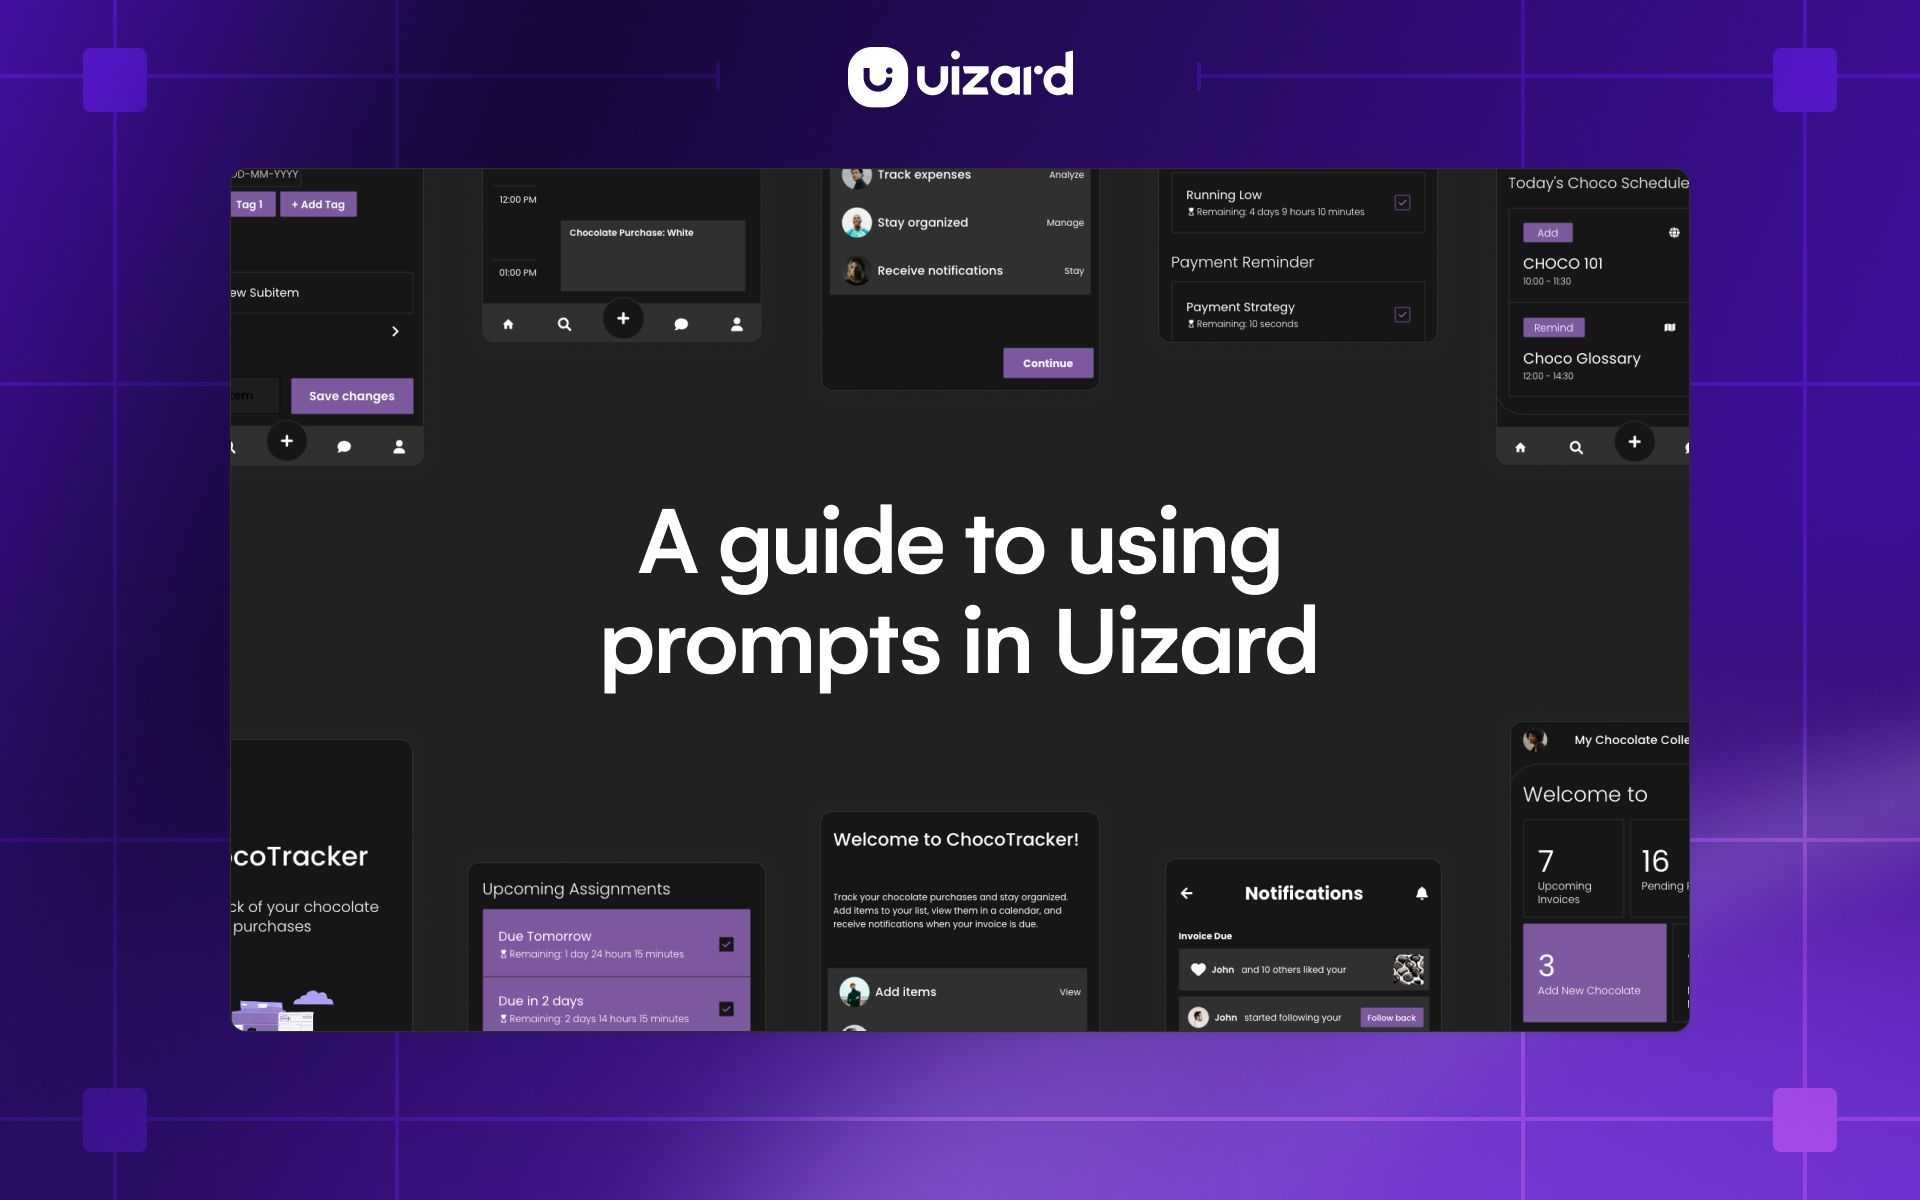 Blog post about using promts in Uizard